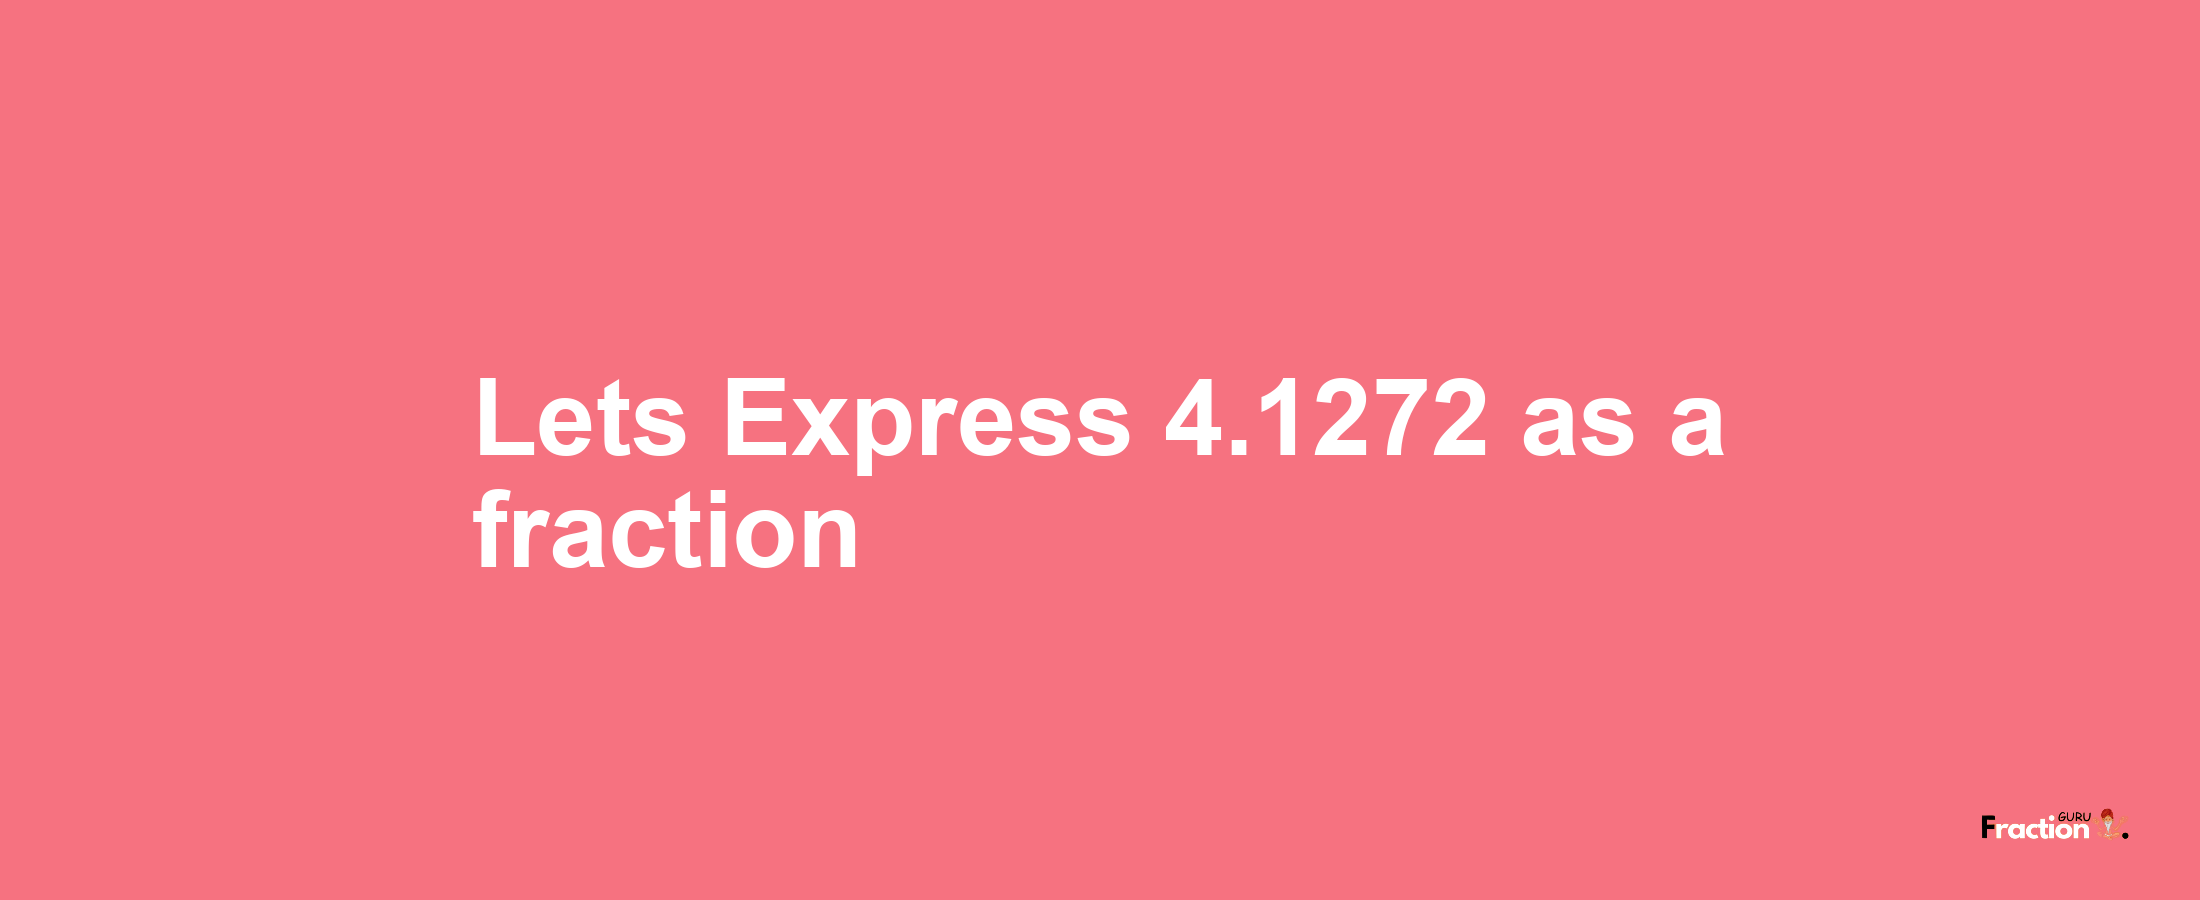 Lets Express 4.1272 as afraction